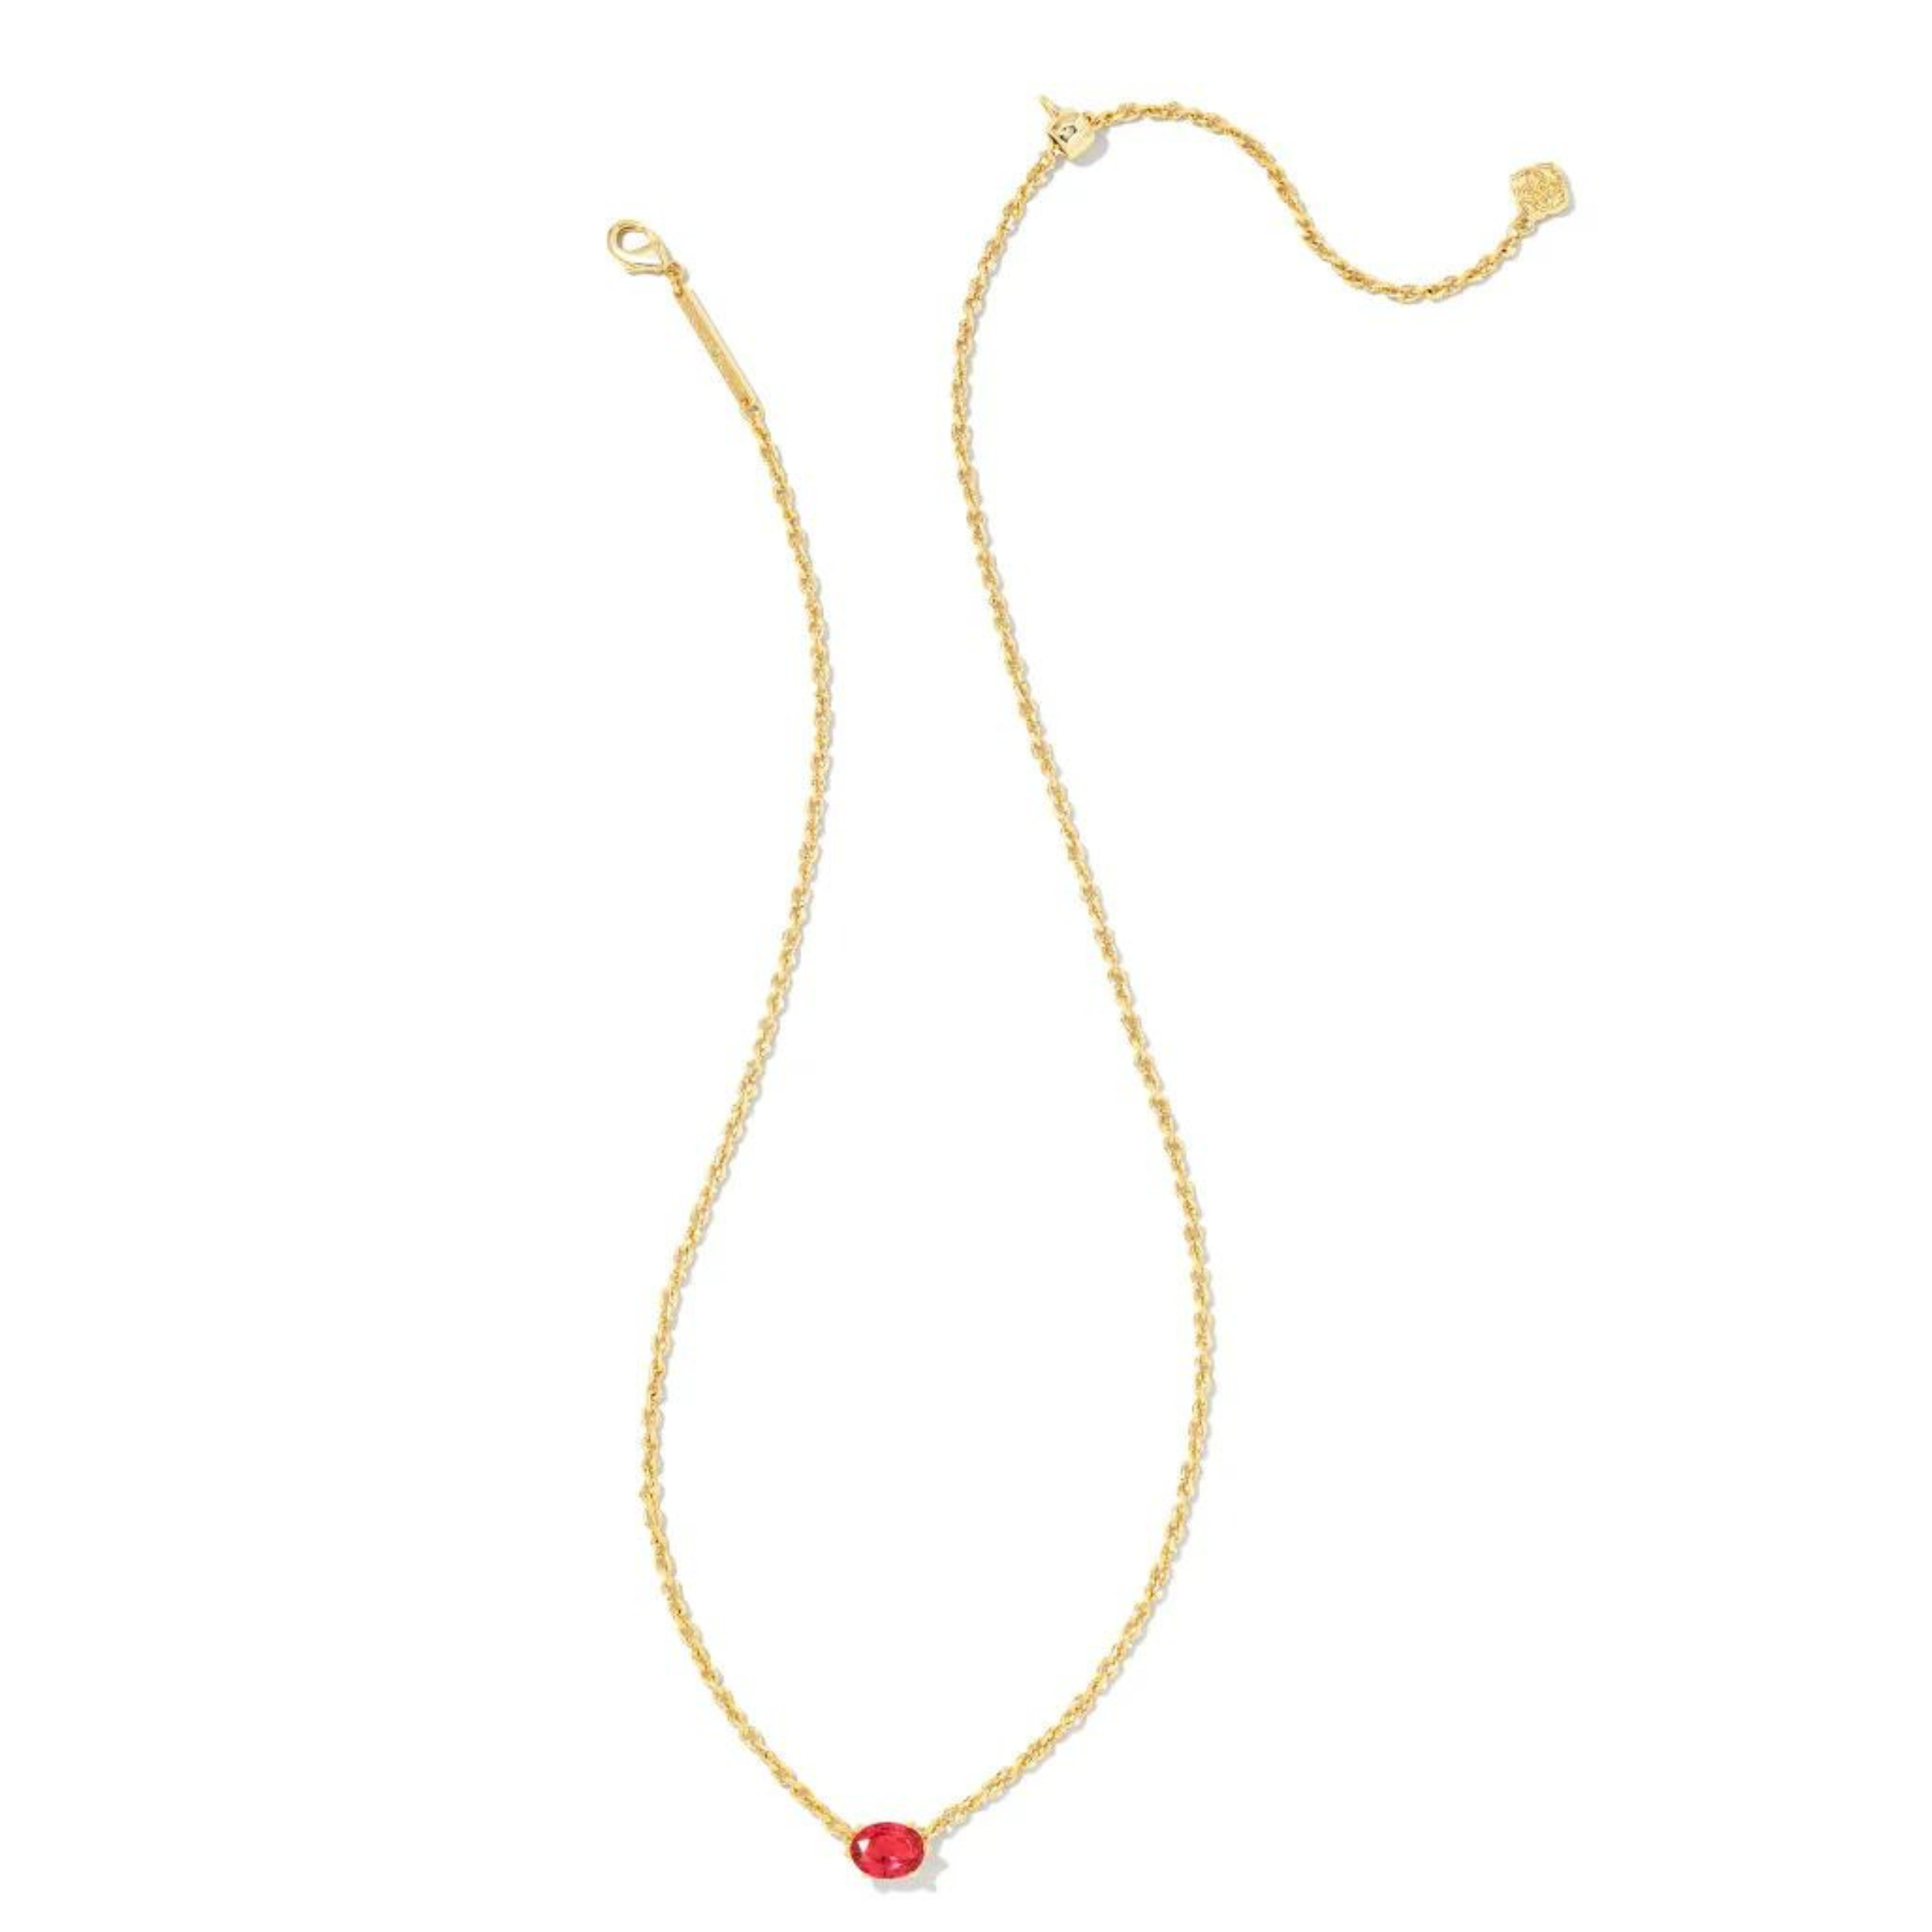 Kendra Scott | Cailin Gold Pendant Necklace in Red Crystal - Giddy Up Glamour Boutique